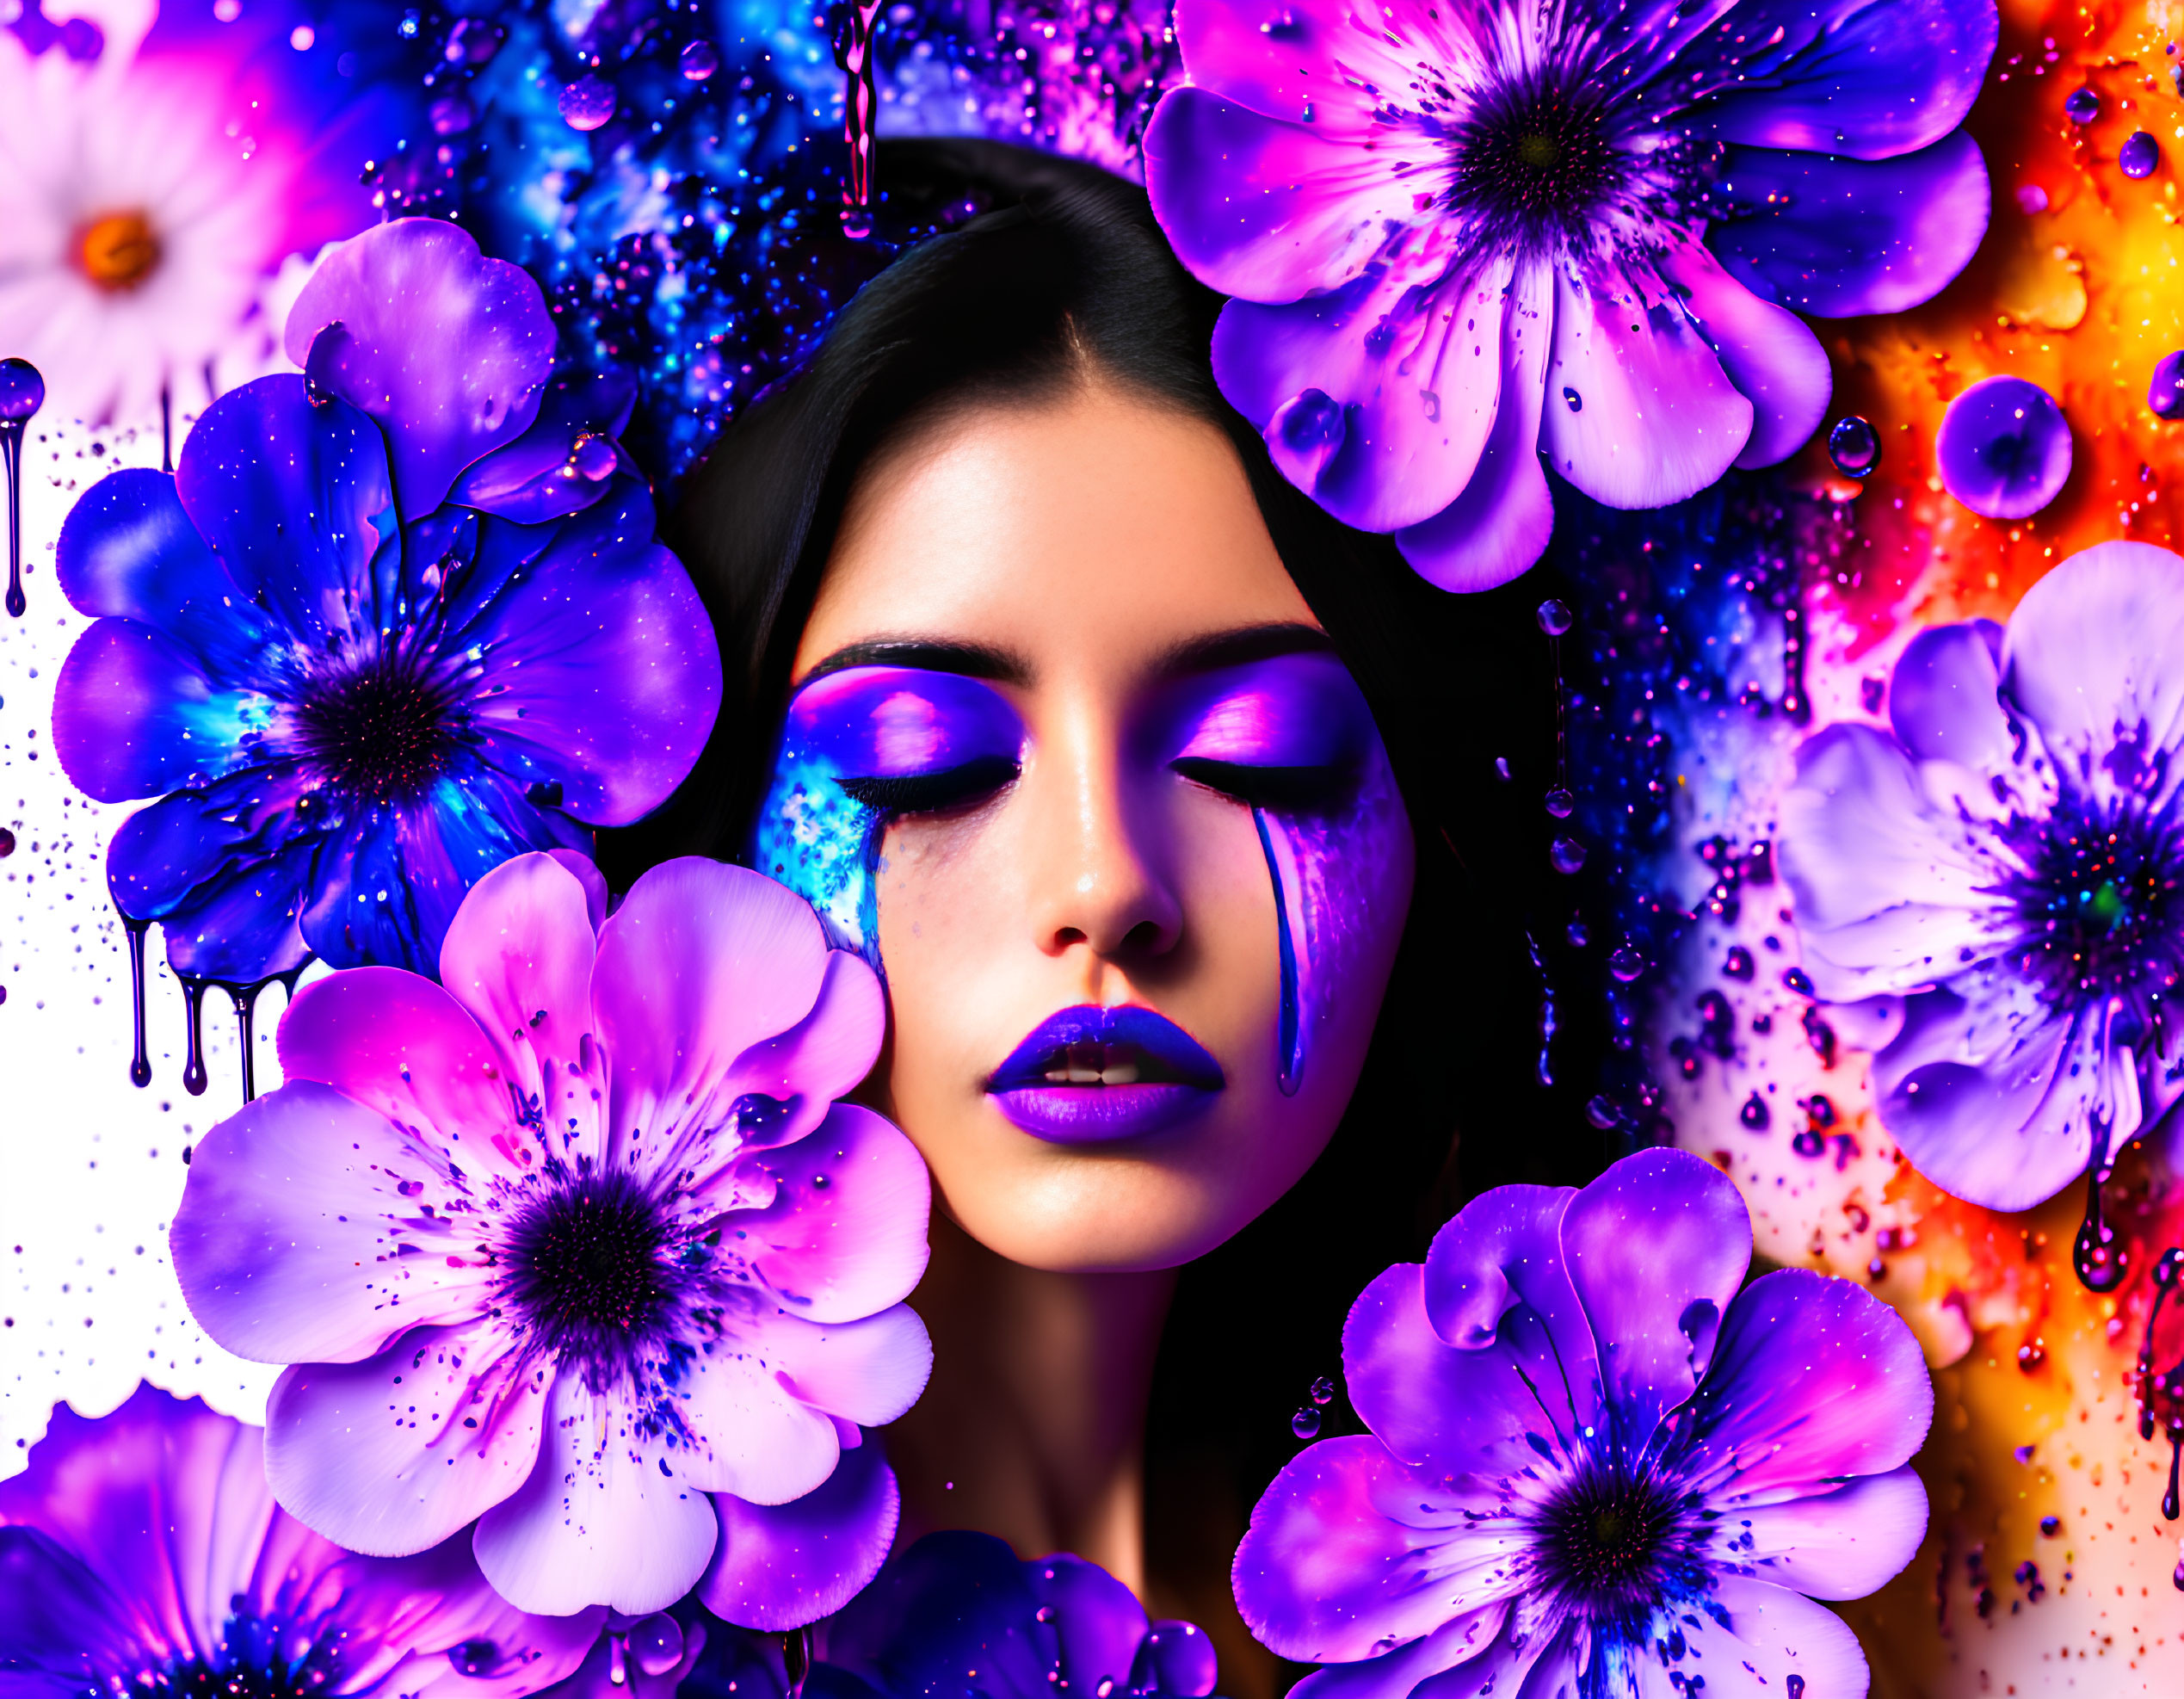 Colorful portrait of woman with purple floral makeup and vibrant flowers.